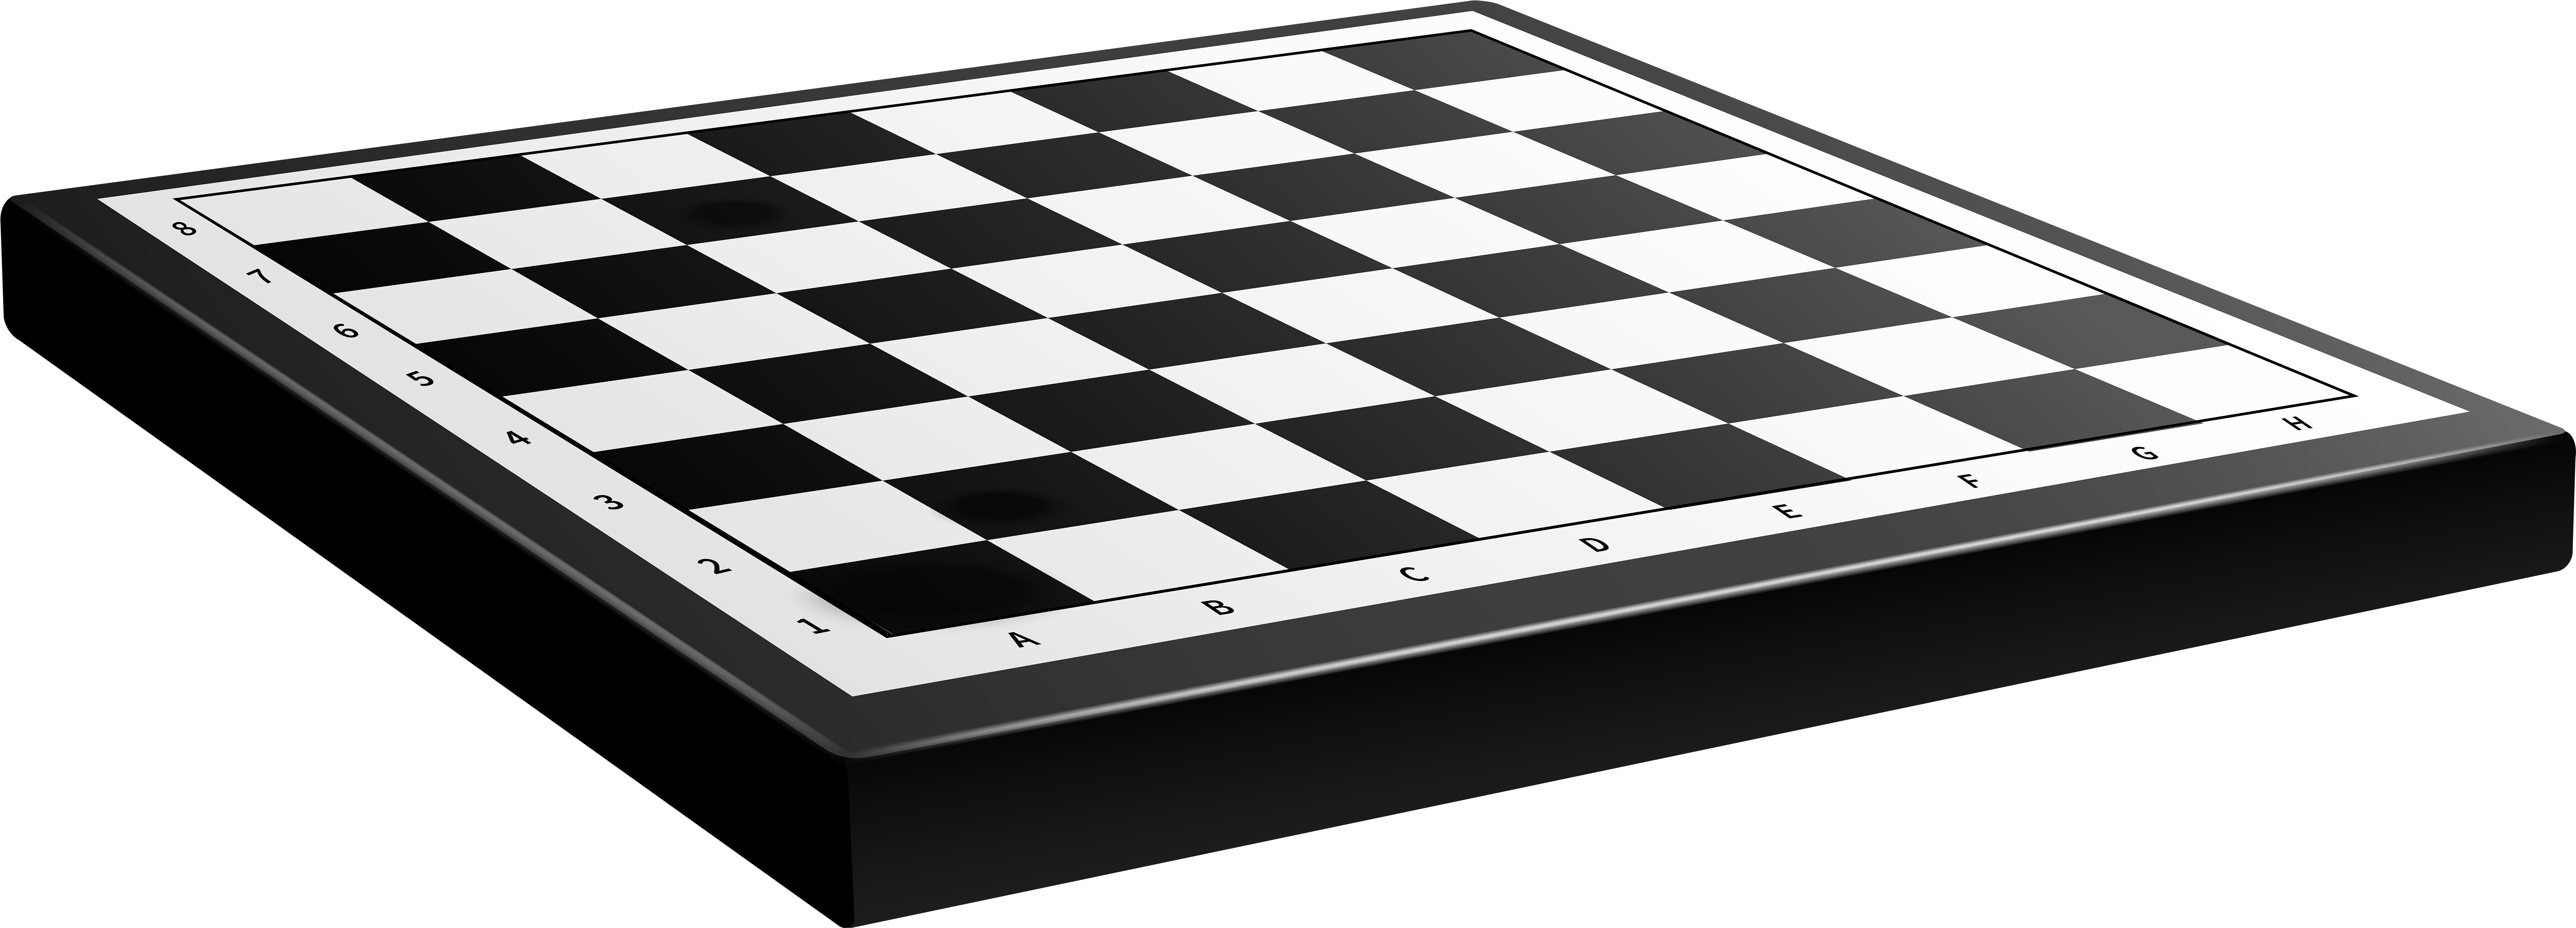 Chessboard Png Clip Art - Magdalen College, Oxford (8000x2944)